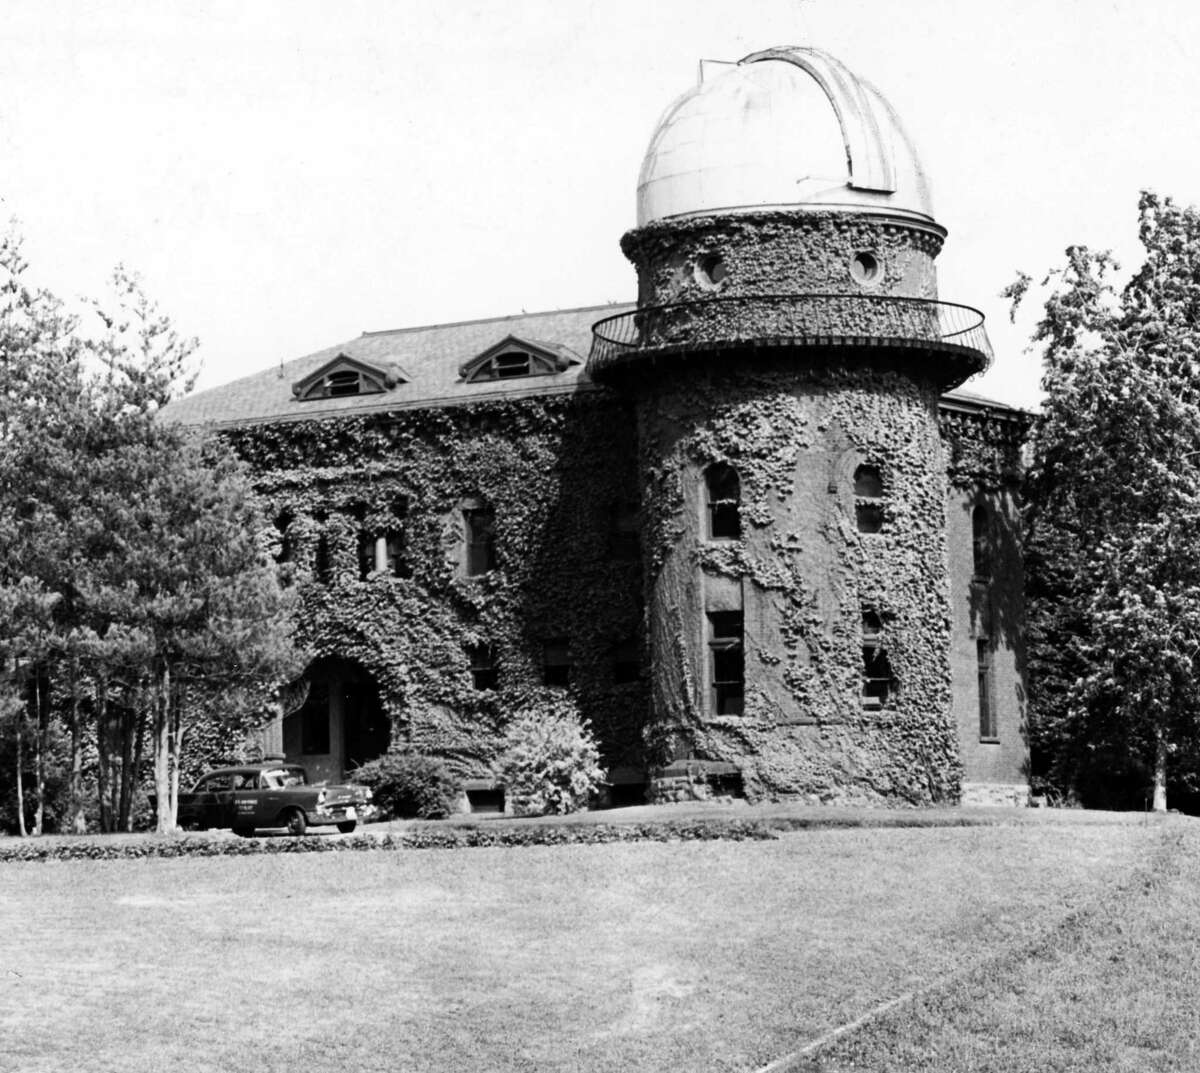 Dudley Observatory, located at 140 South Lake Ave., Albany. Taken August 9, 1958. (Times Union Archive)